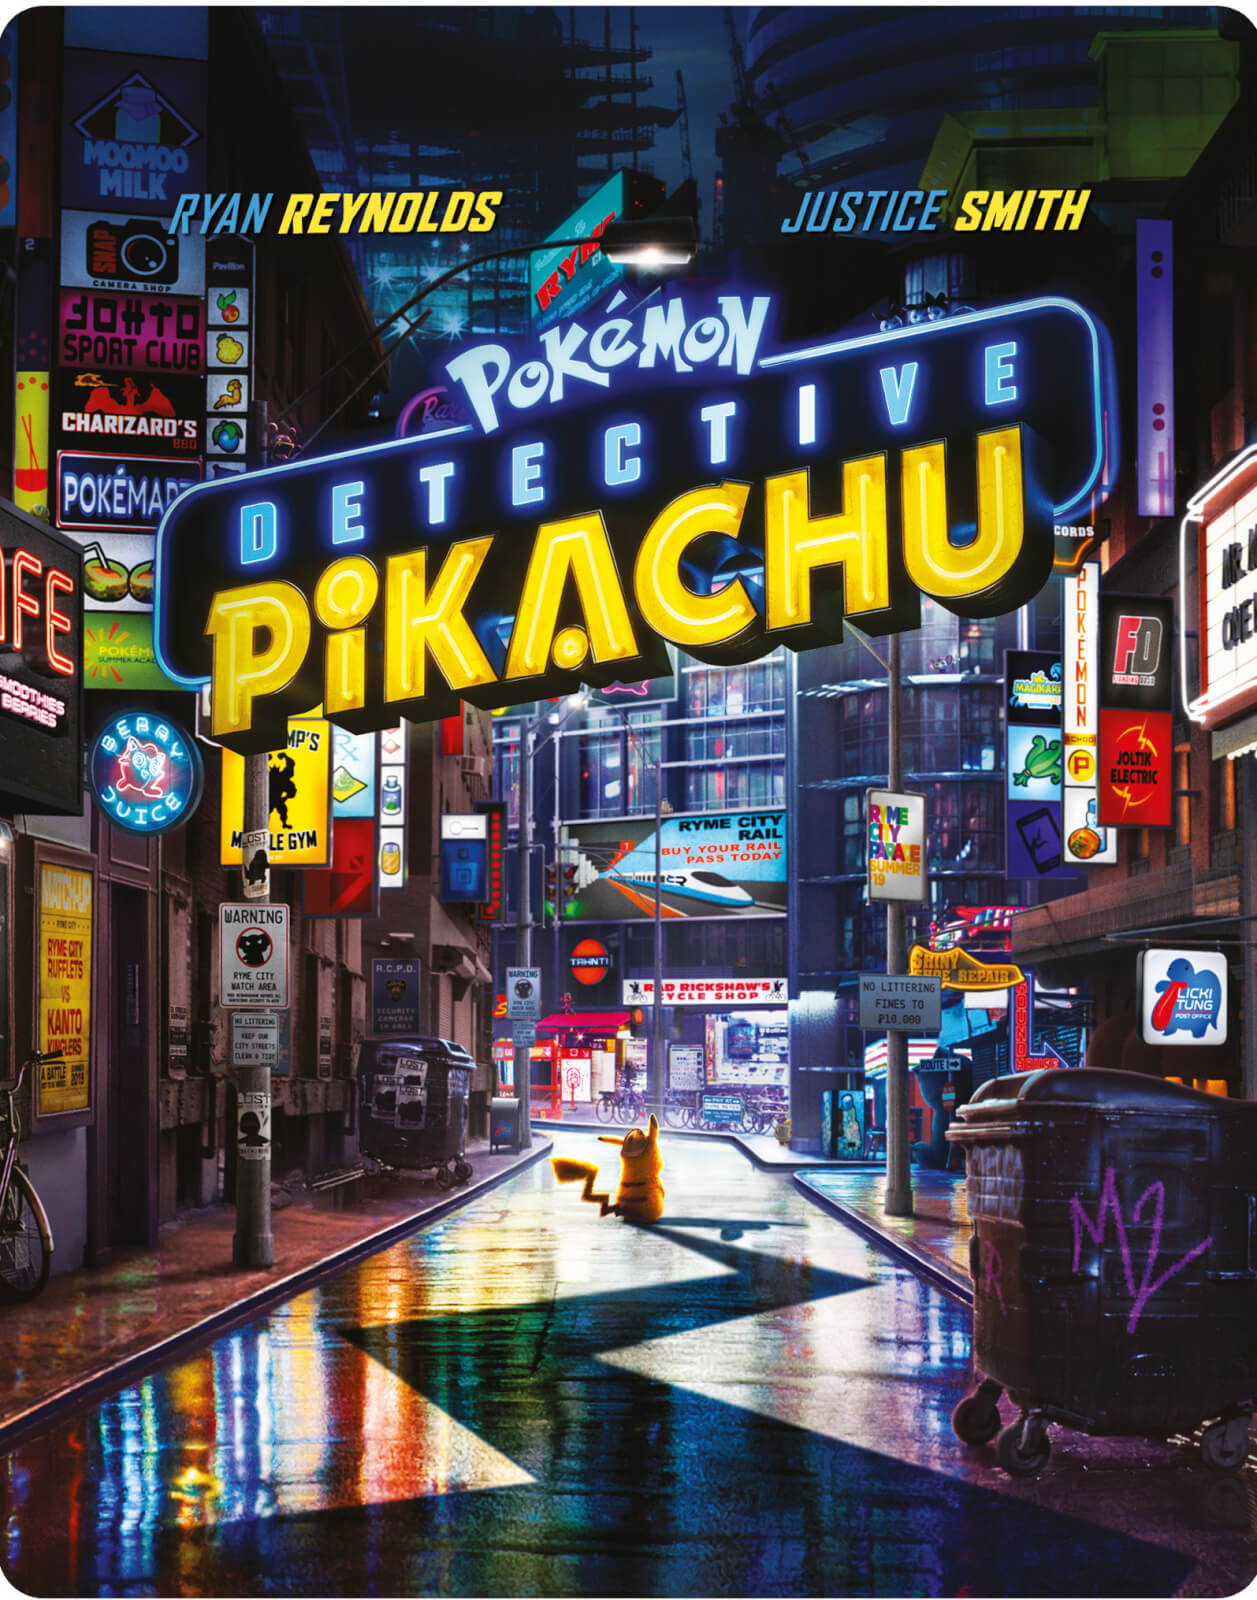 Detective Pikachu Limited Edition 4k Steelbook Includes 2d Blu Ray